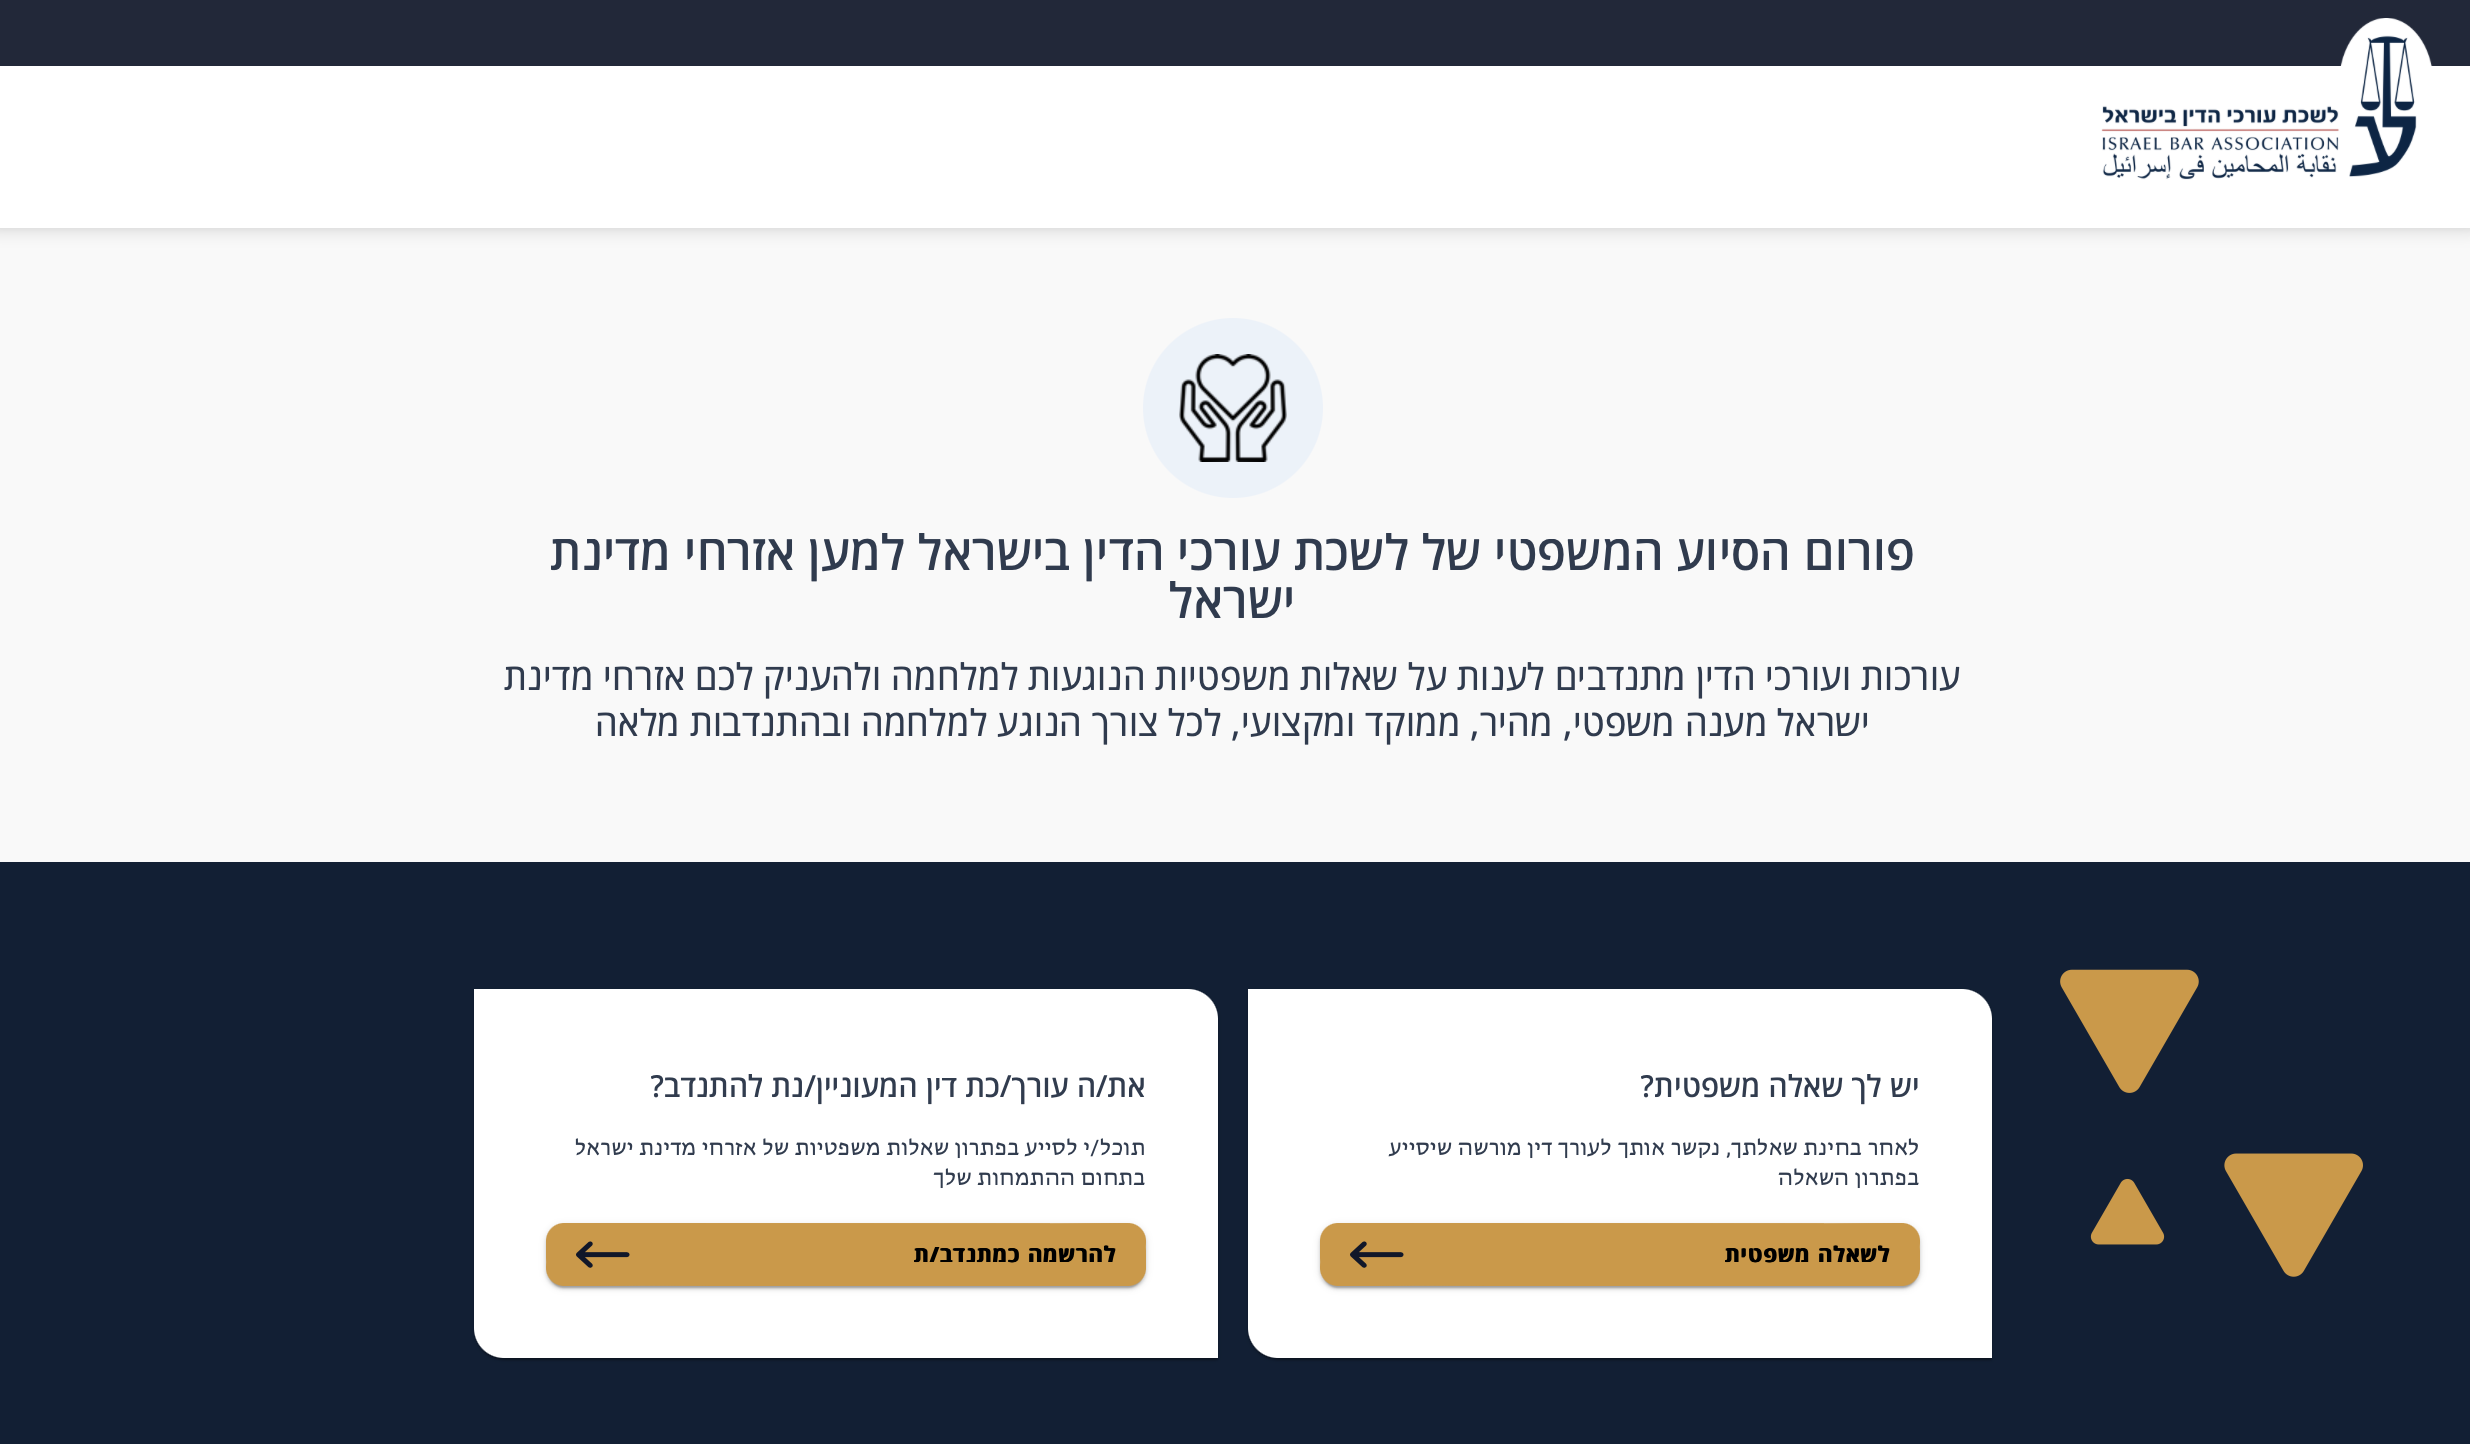 Justice Tech Company Paladin Partners with Israel and New York Bar Associations to Launch Pro Bono Portal for Israeli Citizens Impacted By the War